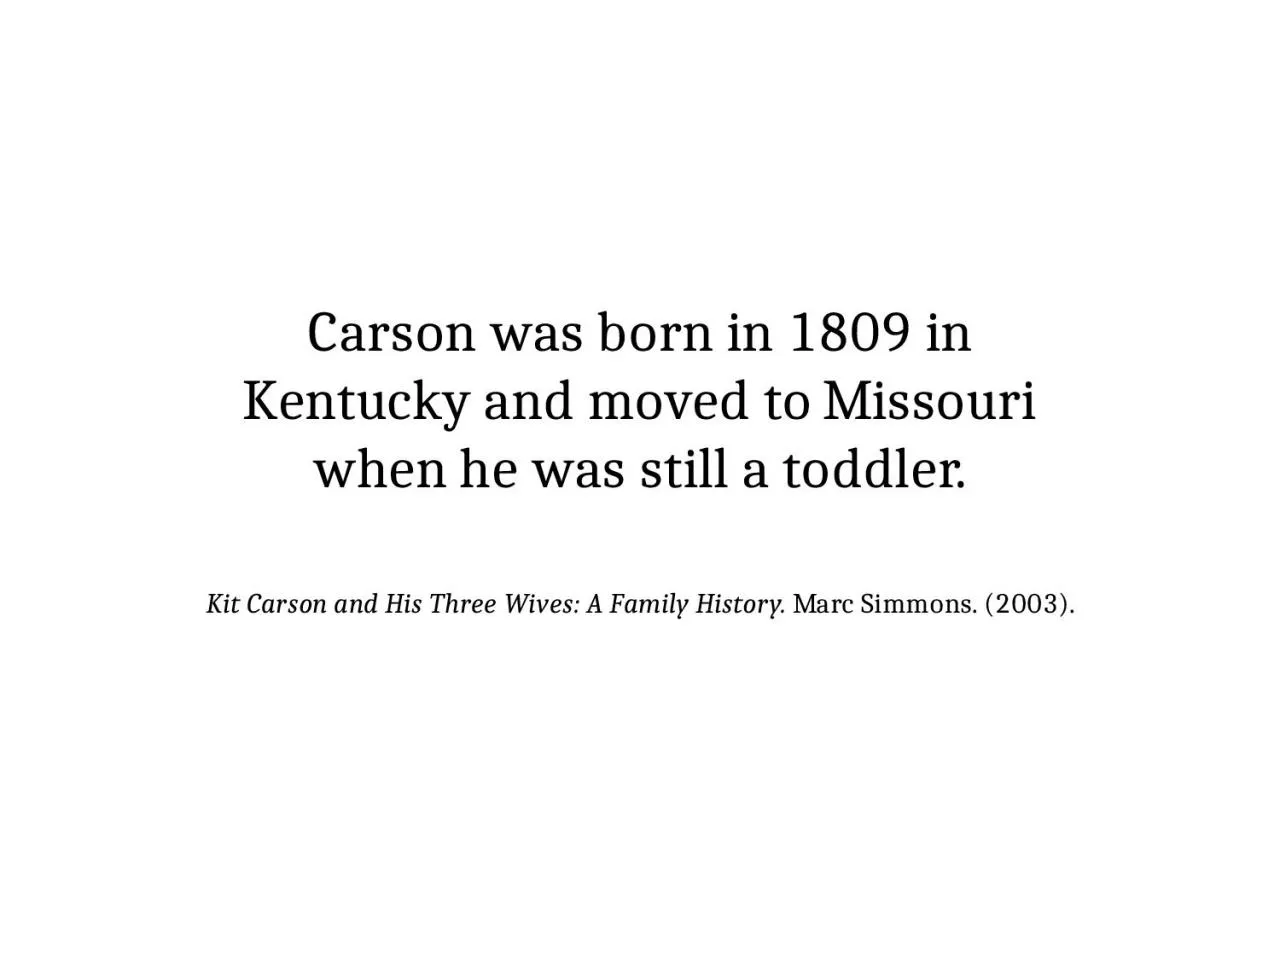 Carson was born in 1809 in Kentucky and moved to Missouri when he was still a toddler.